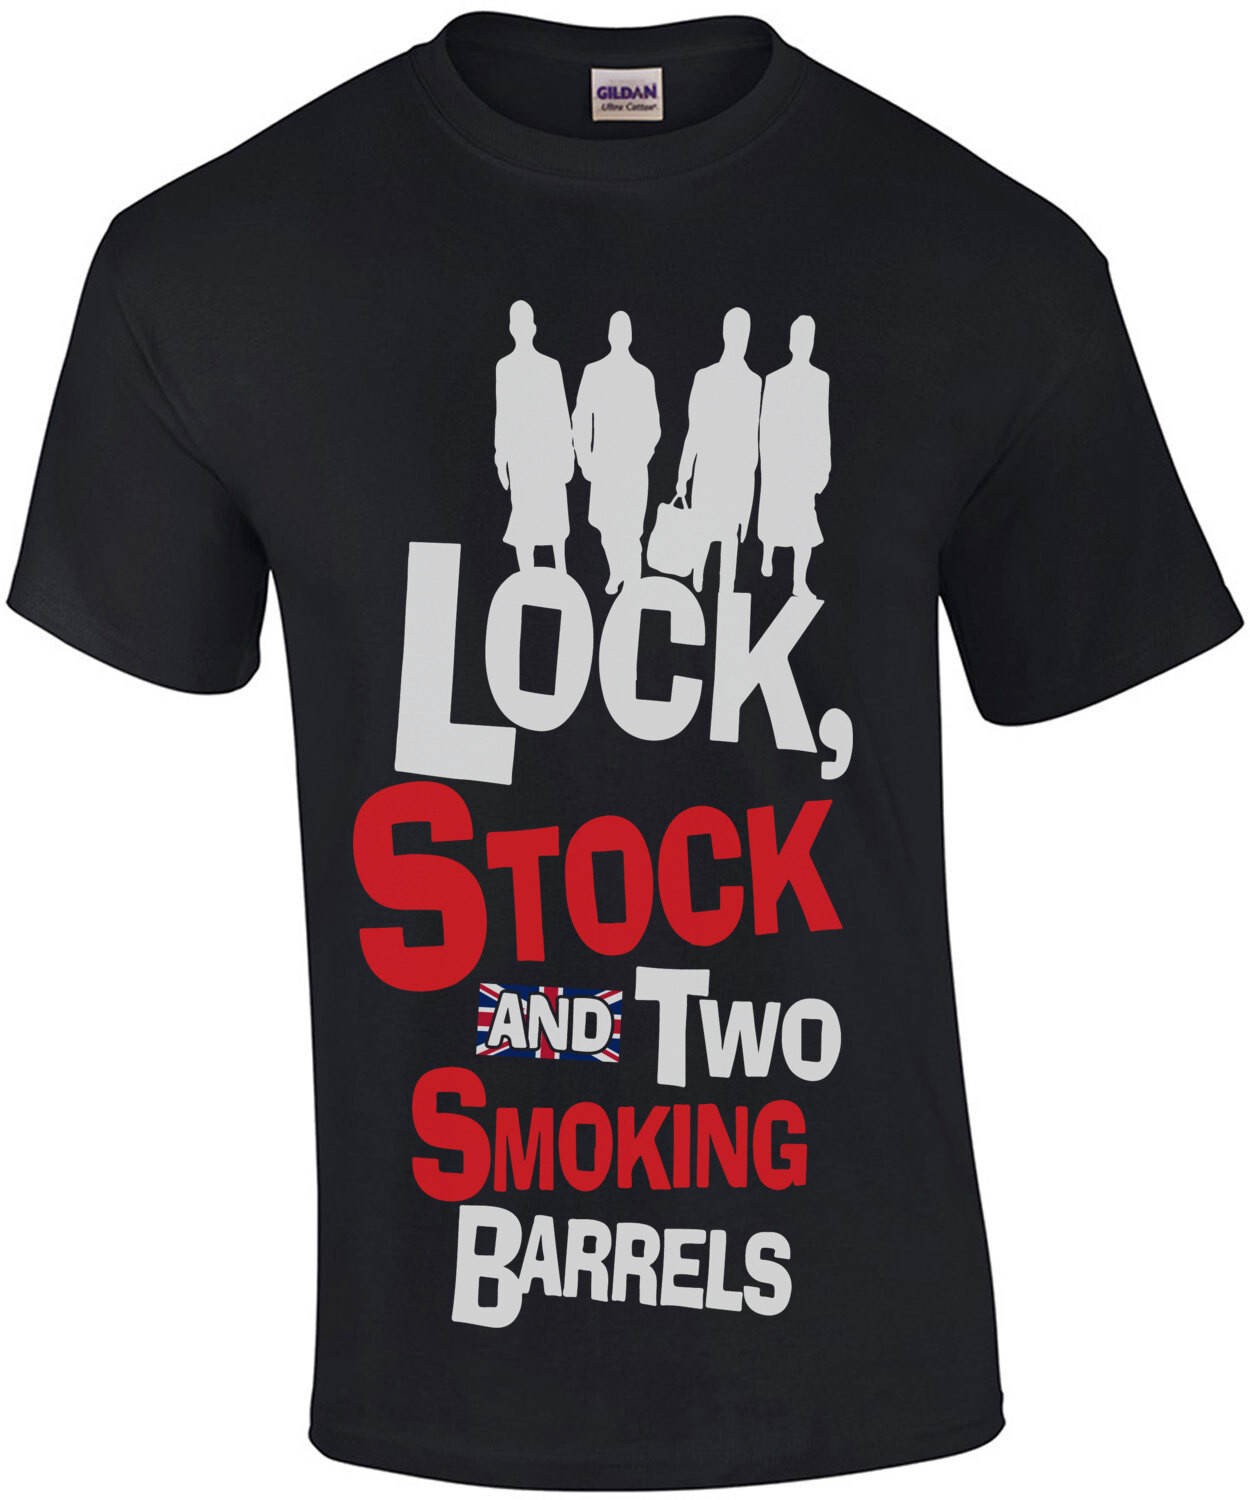 Lock, Stock and Two Smoking Barrels - 90's T-Shirt